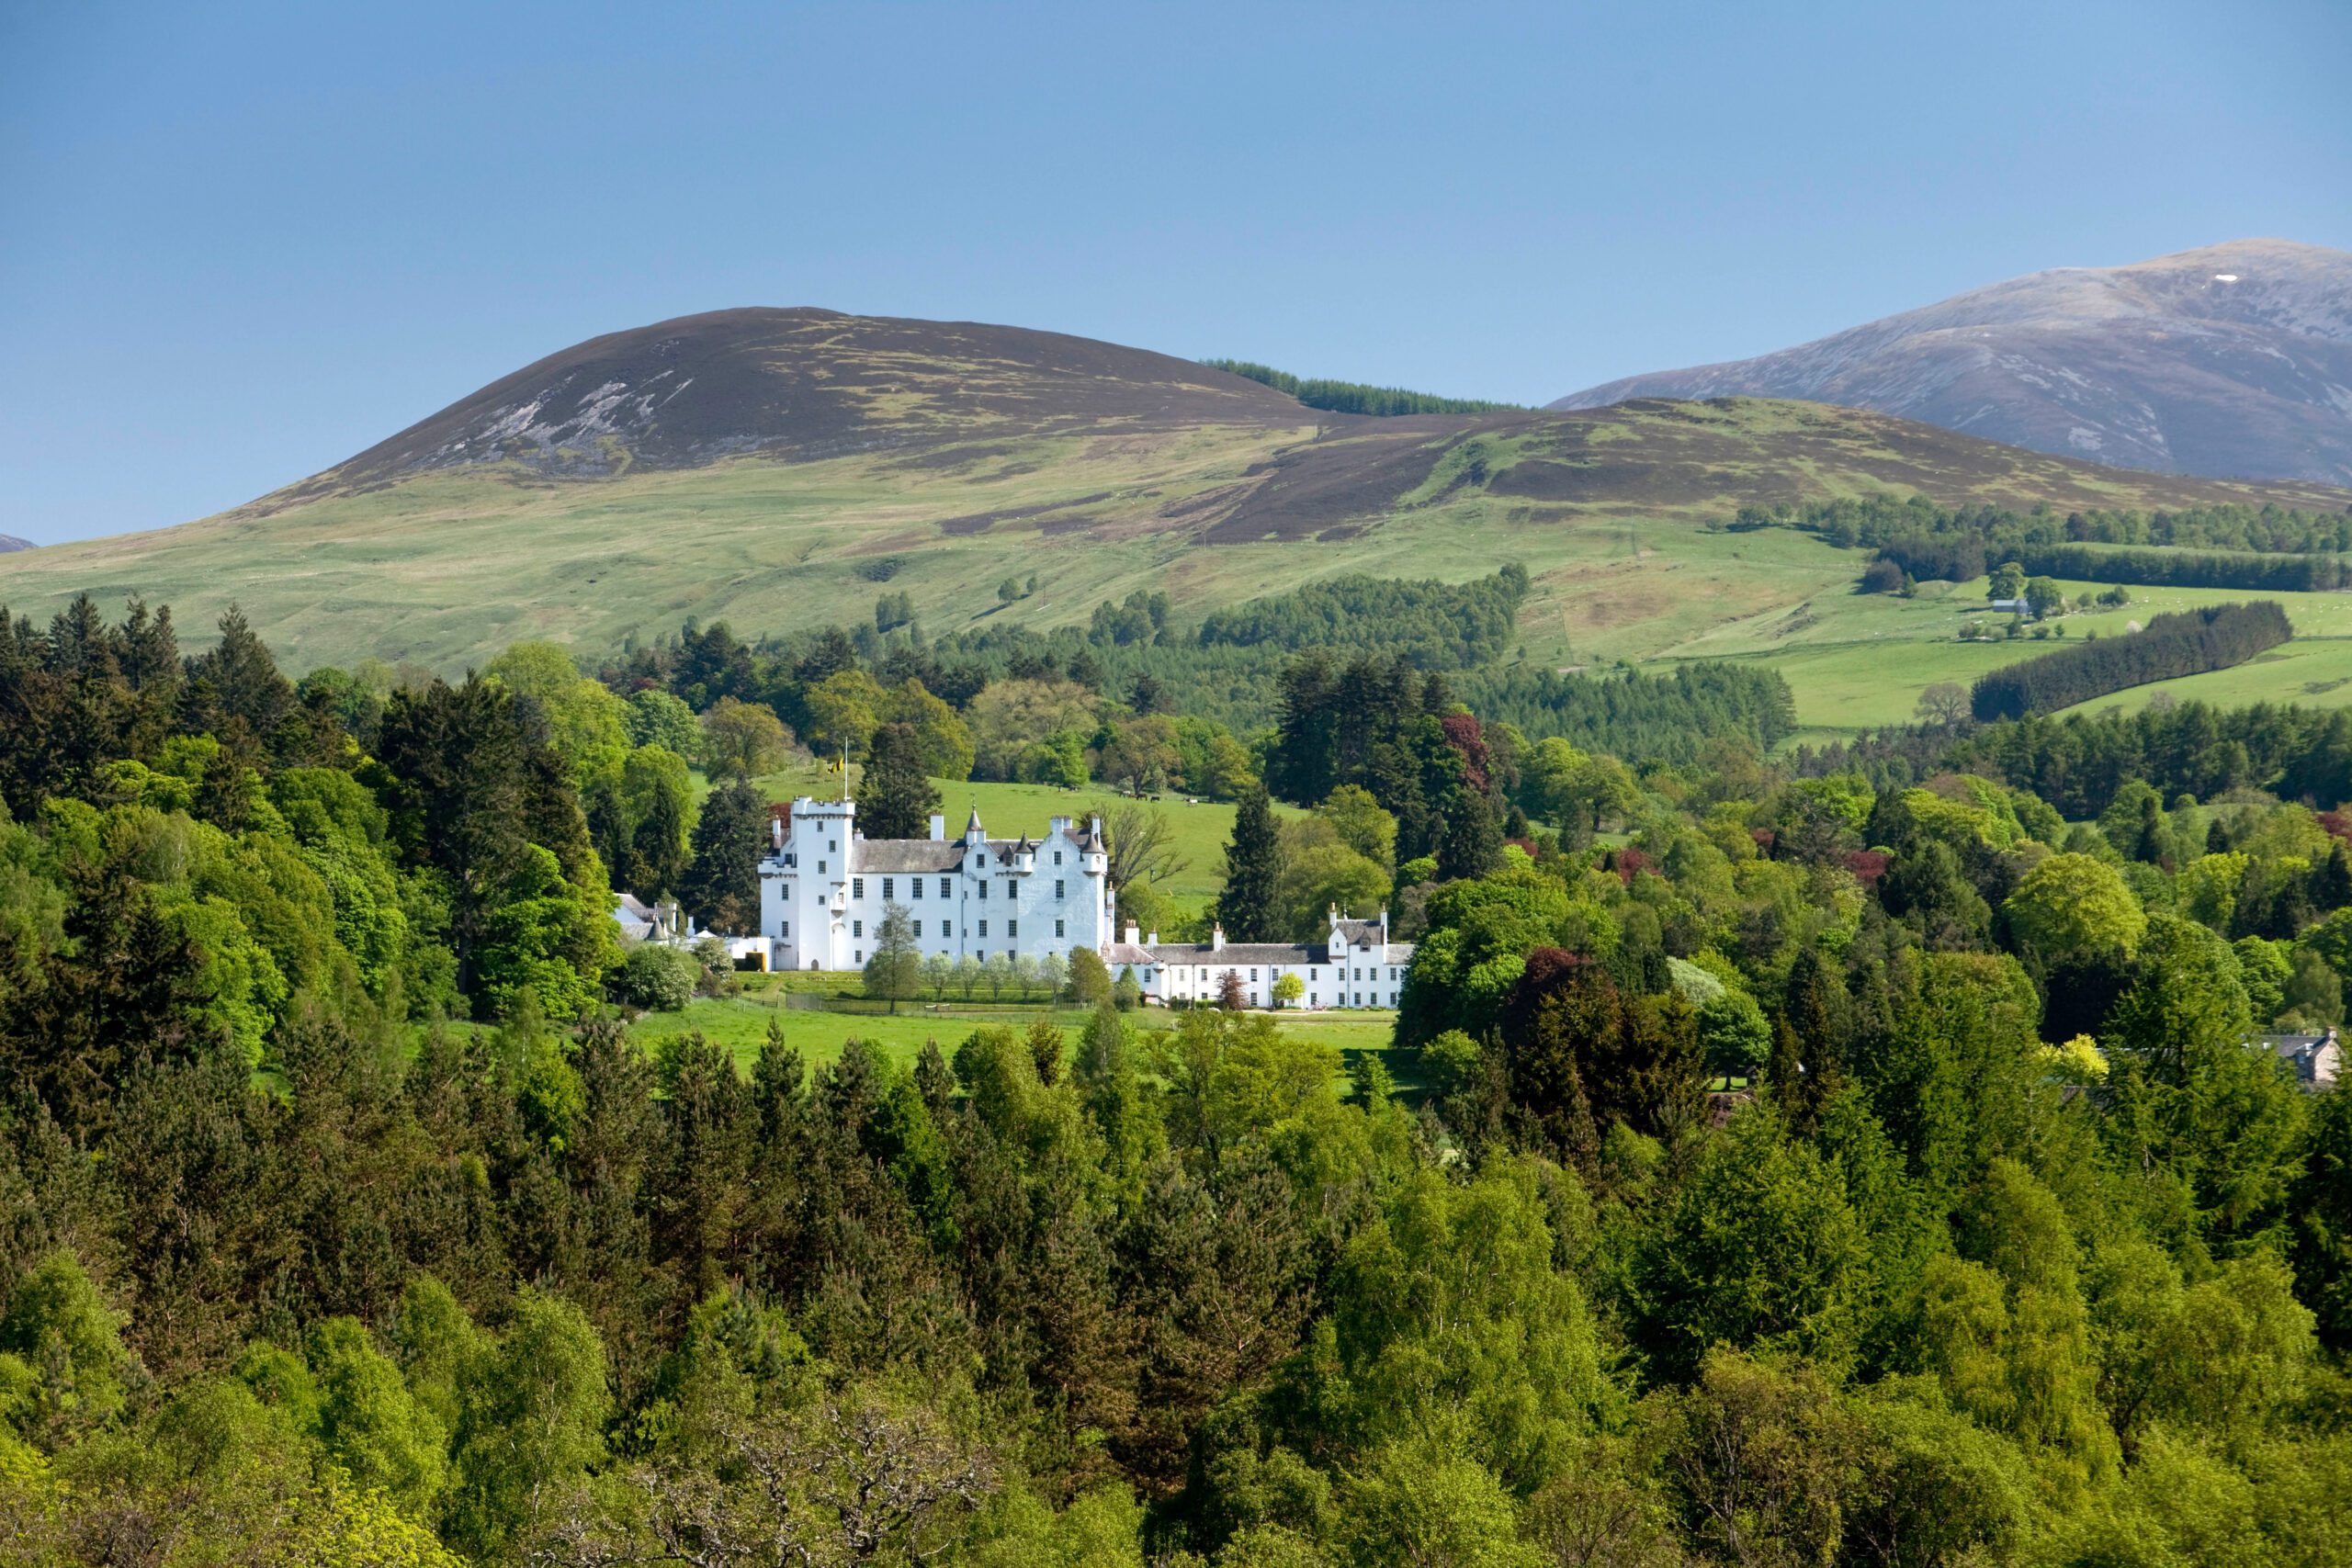 A white Blair castle in the middle of a green forest